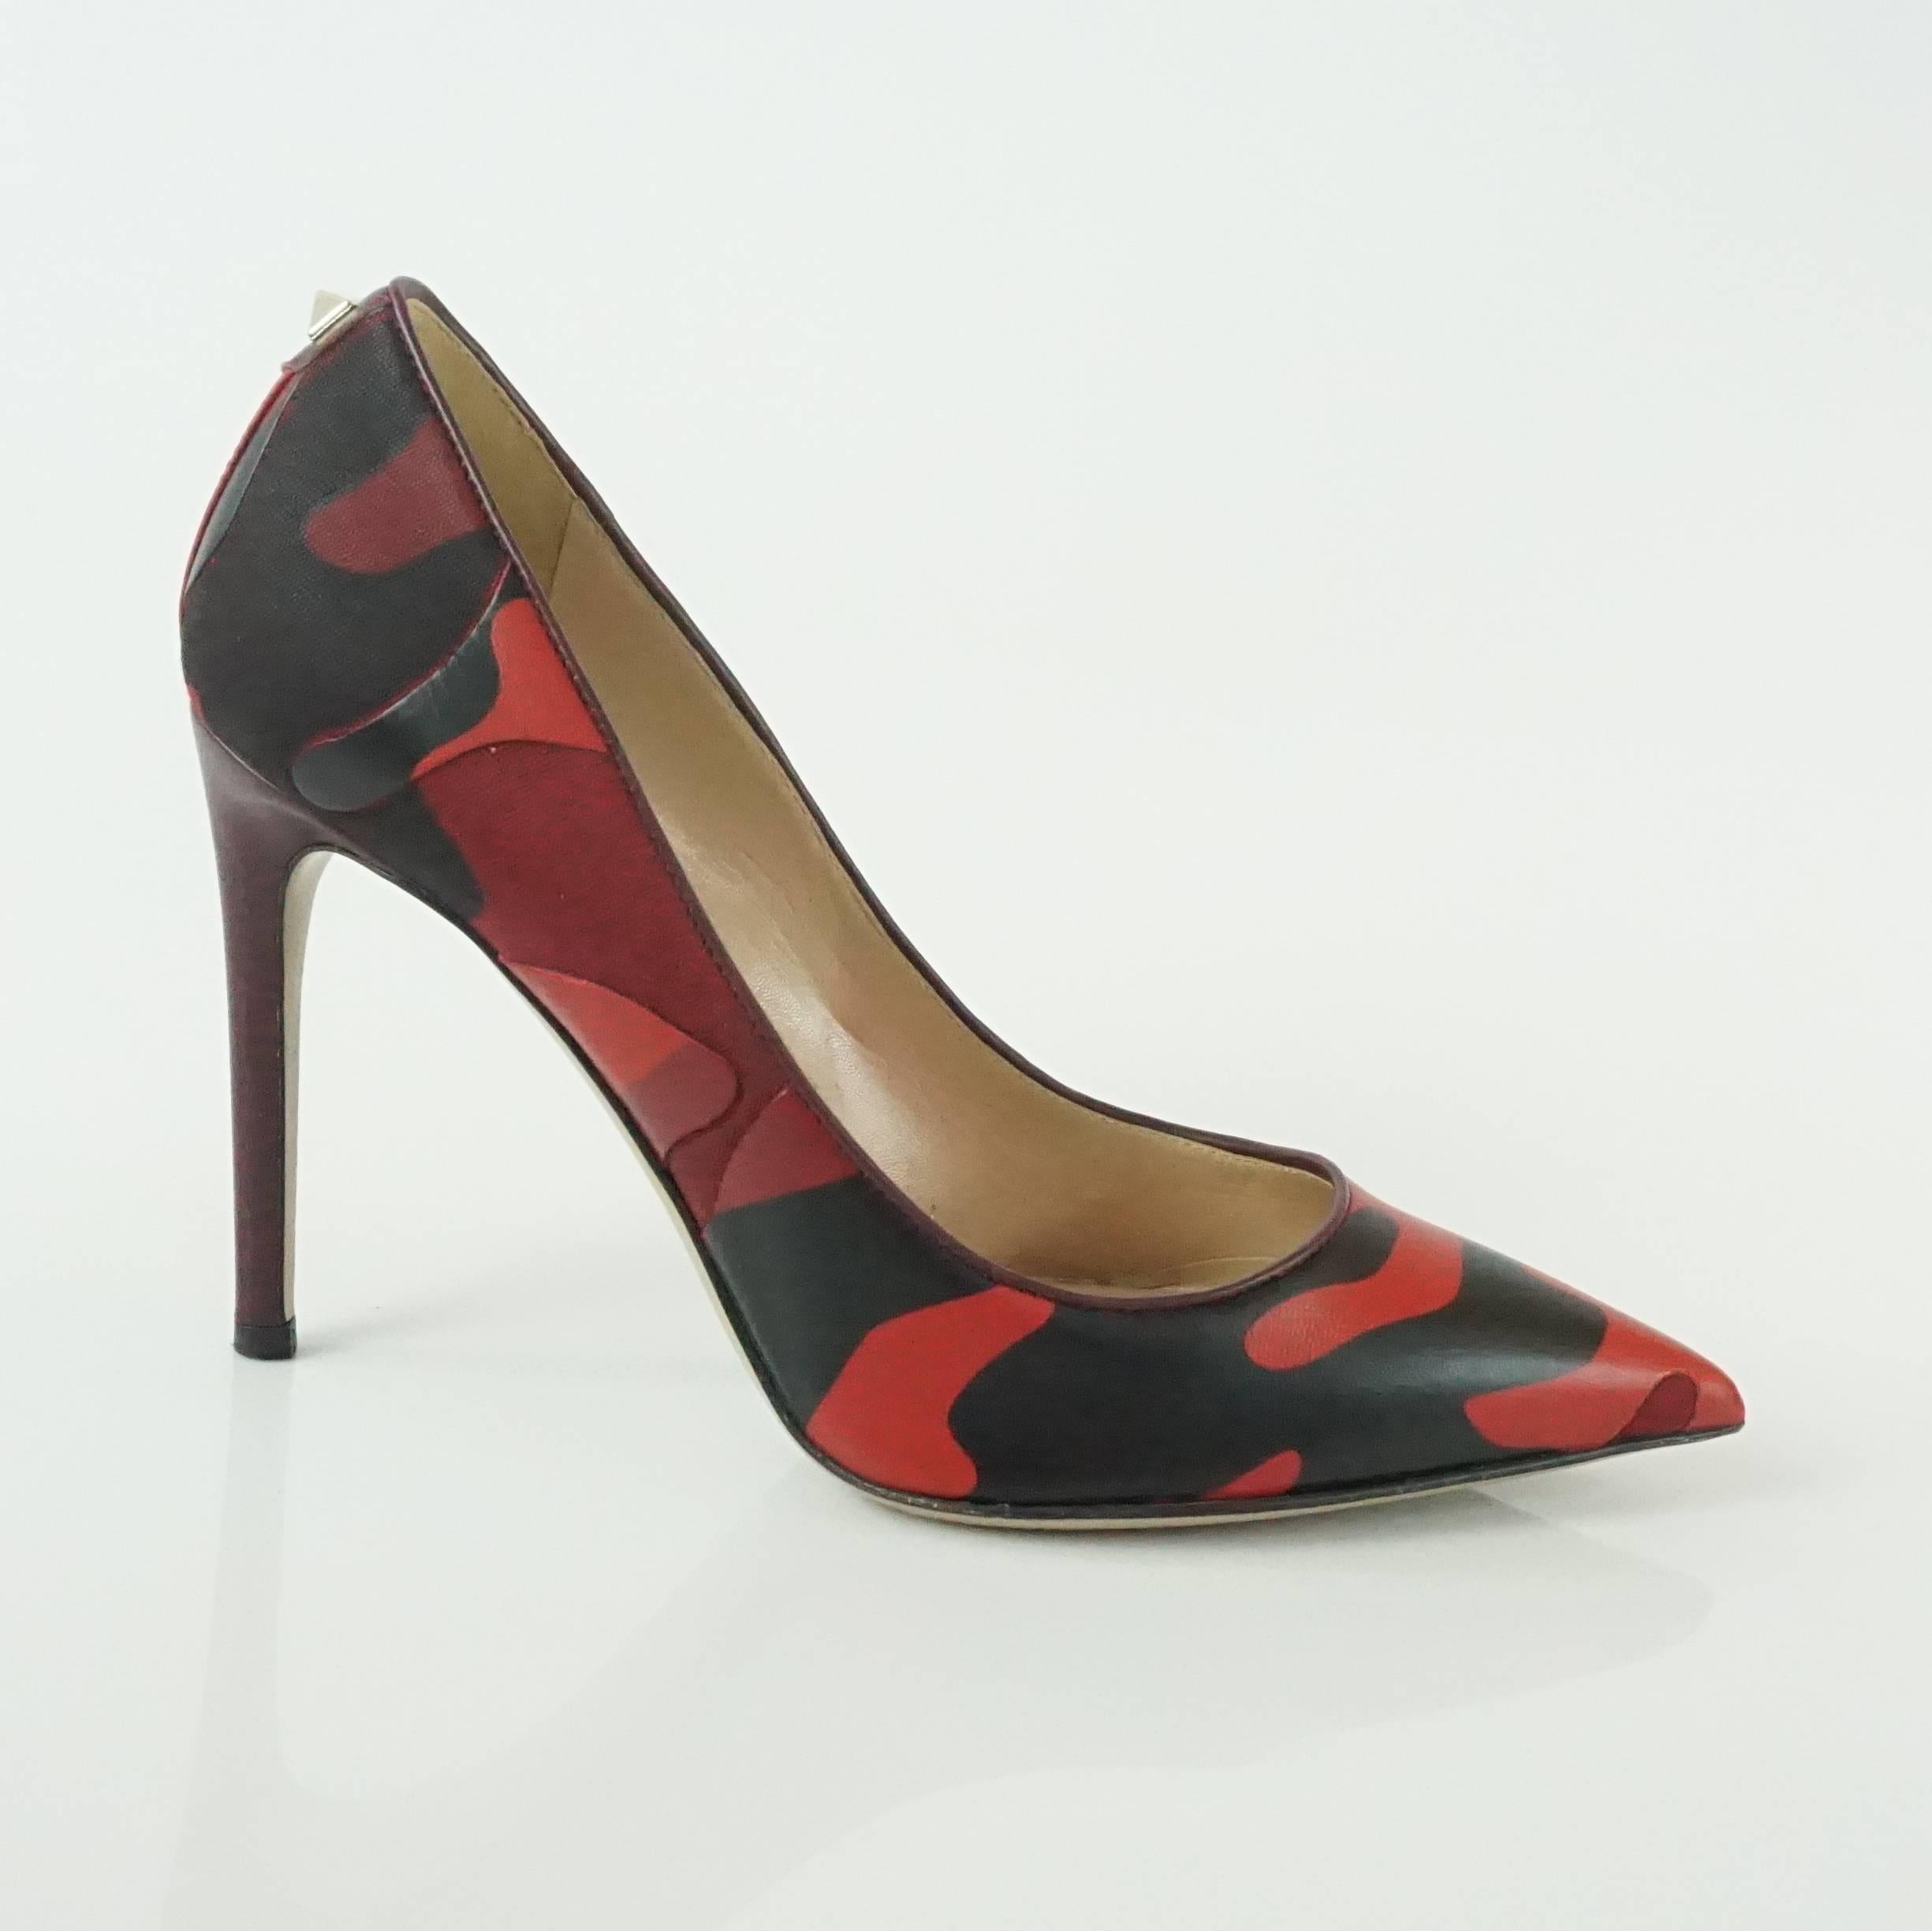 These Valentino pointed toe pumps are a red and black camo print made up of fabric and leather. The heel is a burgundy leather with one gold rockstud detail. They are in excellent condition with minor bottom wear and a very small light scuff on the